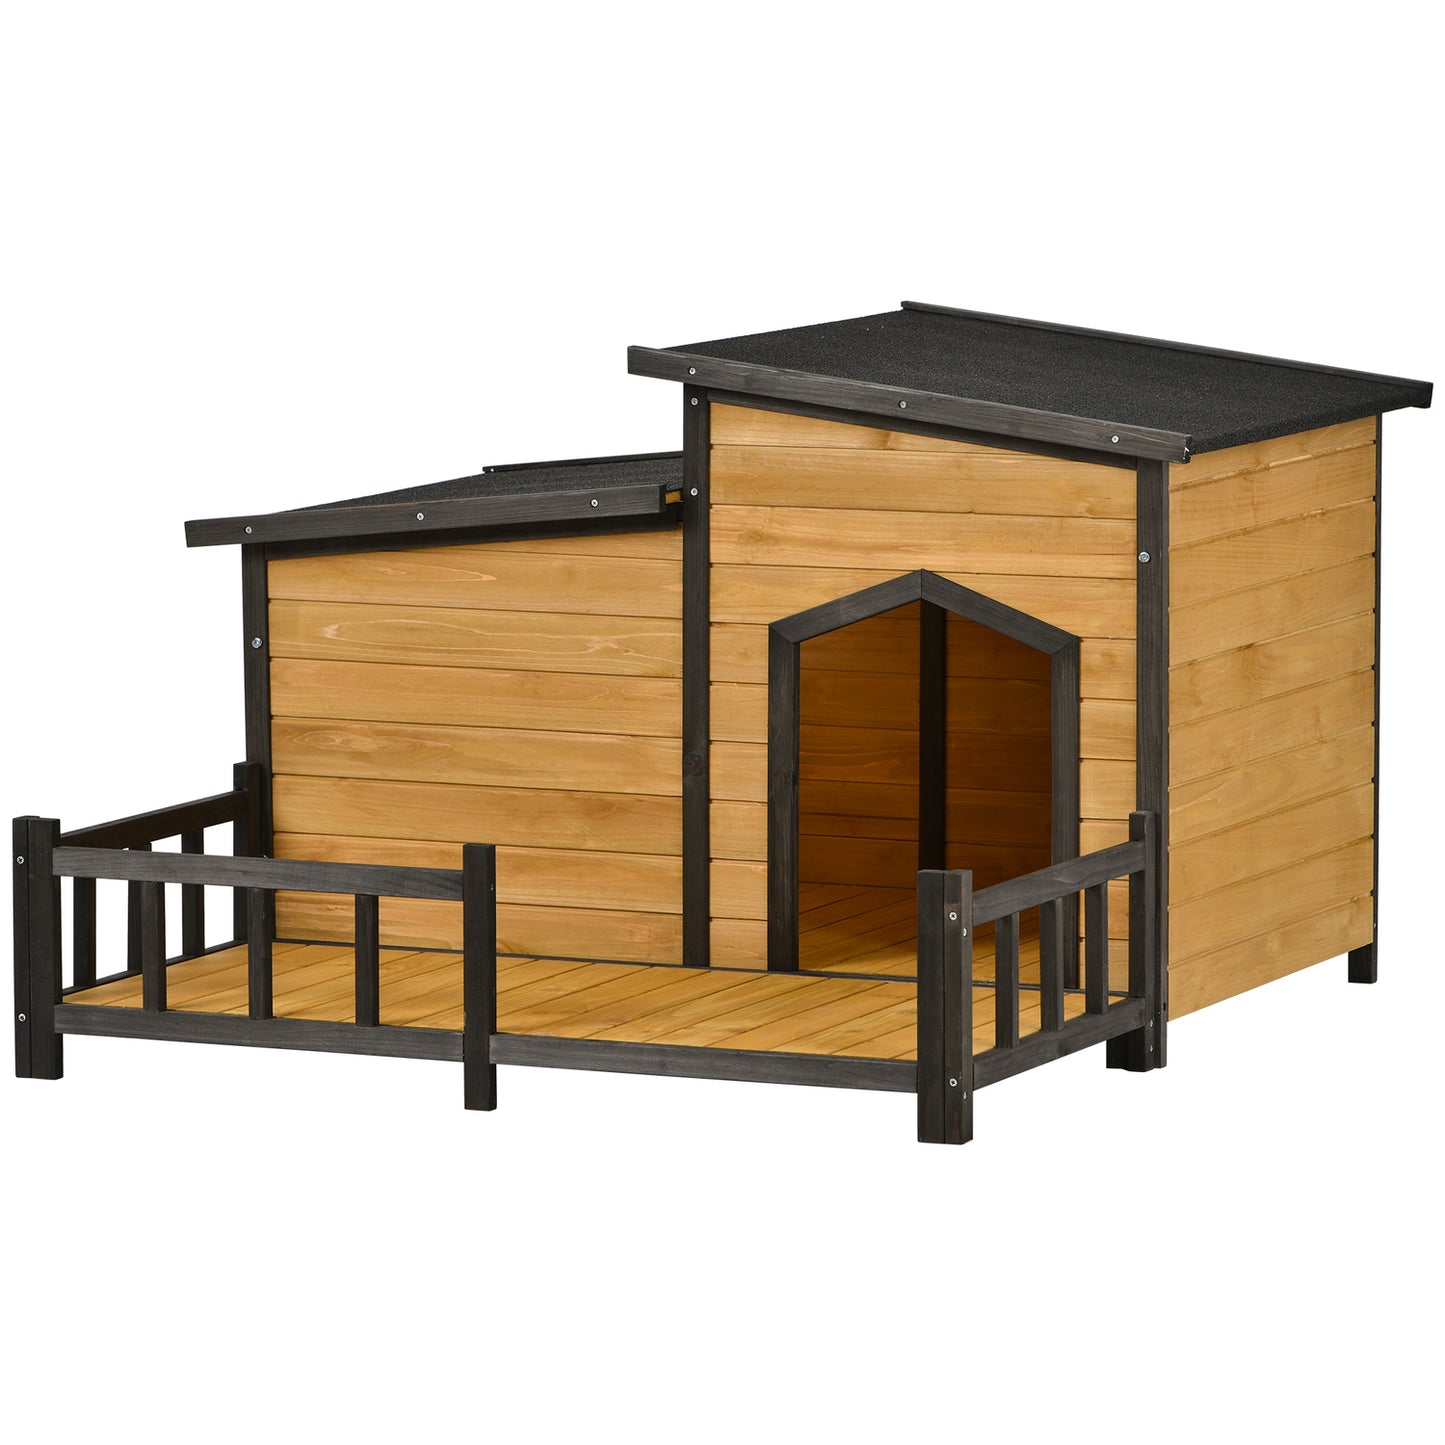 CHURANTY 47.2 Inch Large Wooden Pet Outdoor Wooden Dog House with Porch,Dog Kennel Cabin Style Outdoor & Indoor Dog Crate